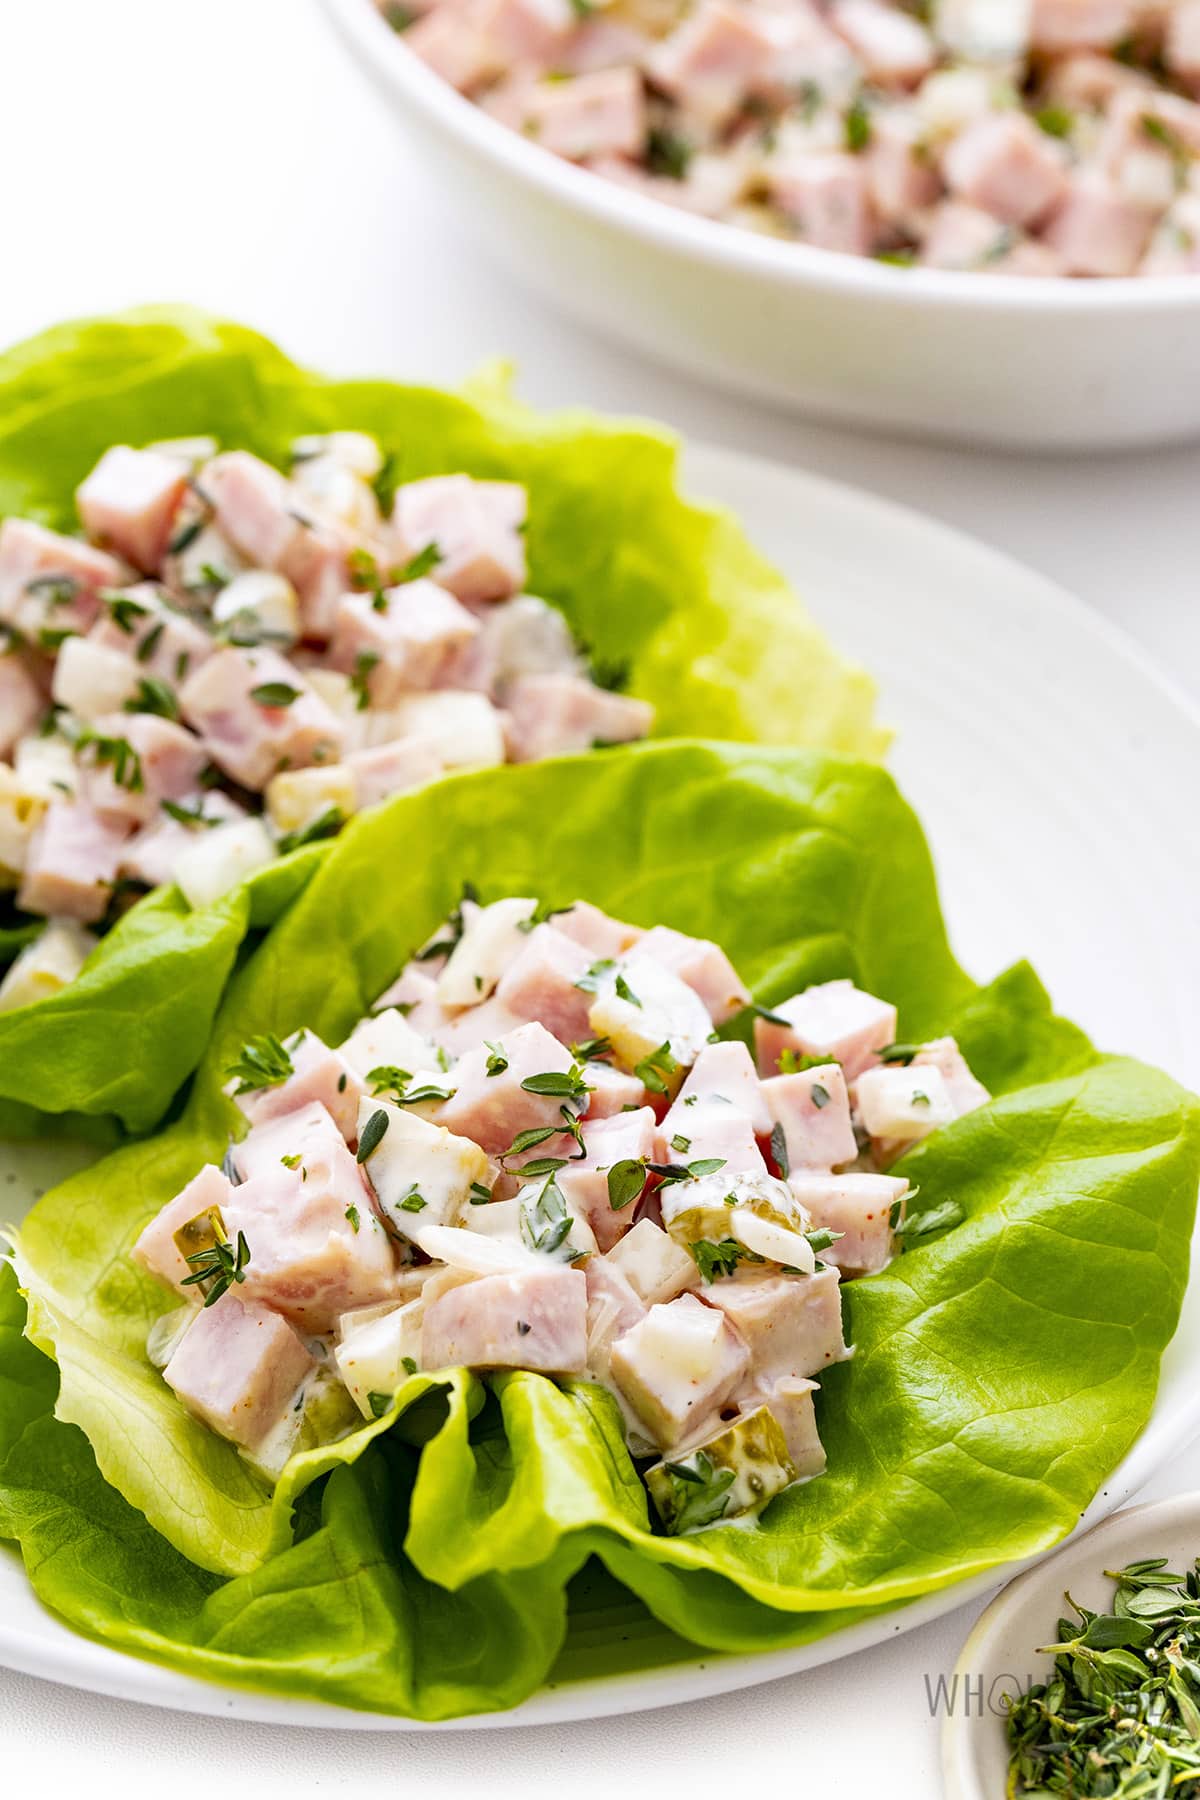 Ham salad in lettuce wraps on a plate.